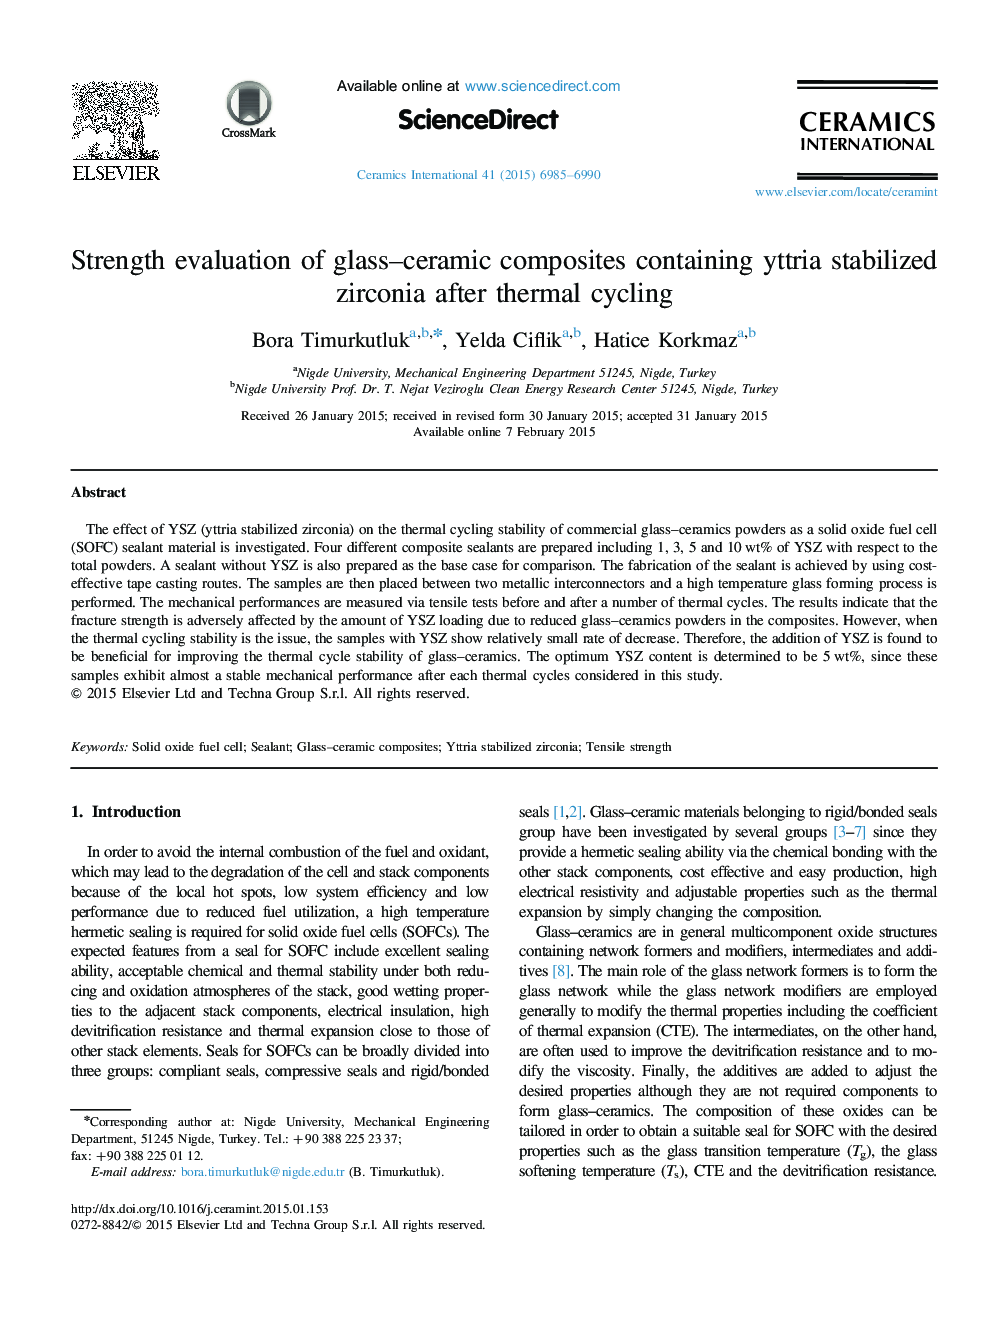 Strength evaluation of glass–ceramic composites containing yttria stabilized zirconia after thermal cycling